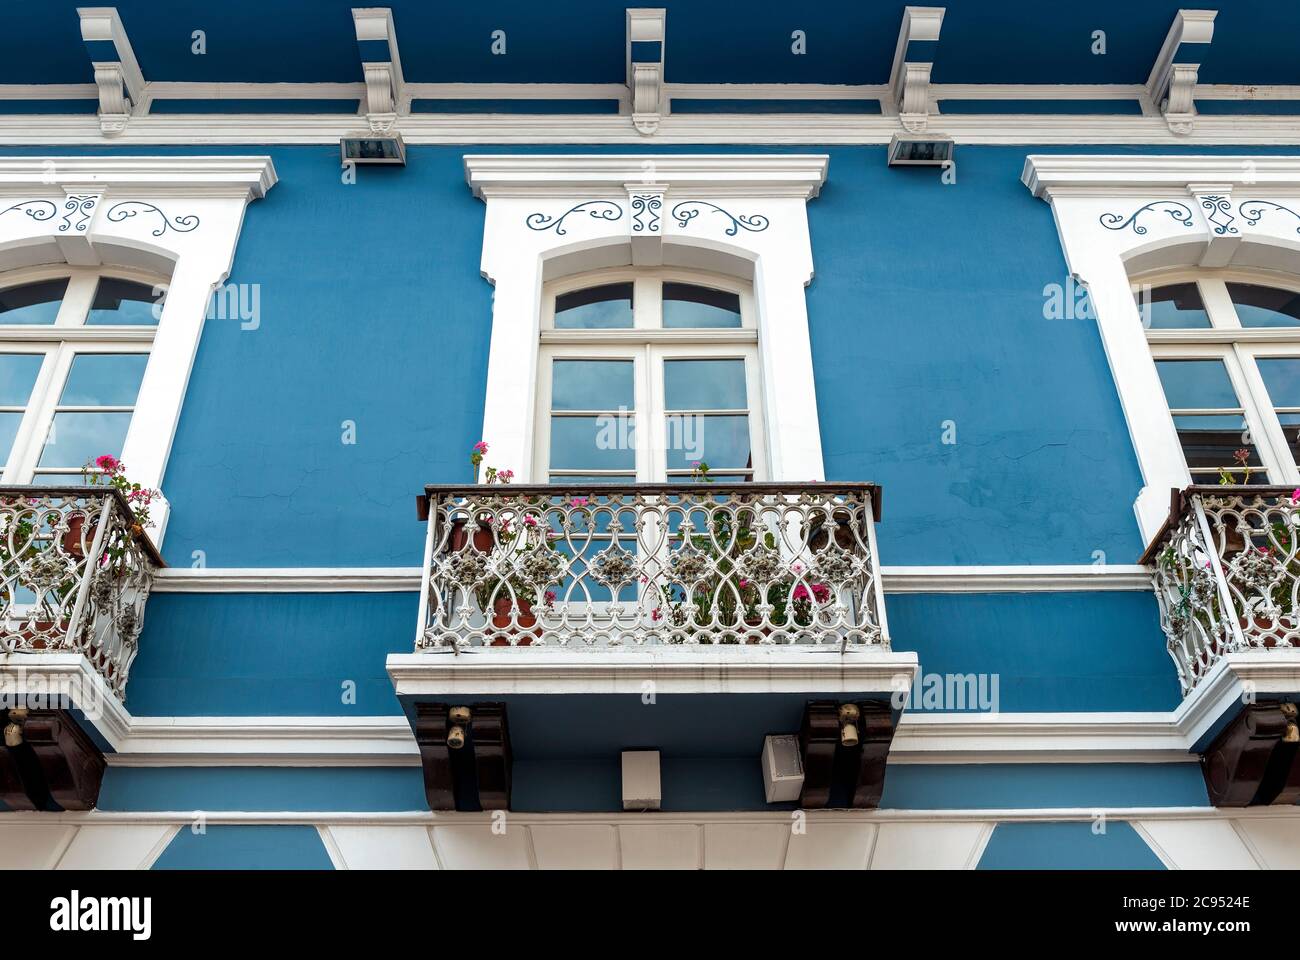 Colonial style architecture with blue and white facade and balcony, Quito, Ecuador. Stock Photo